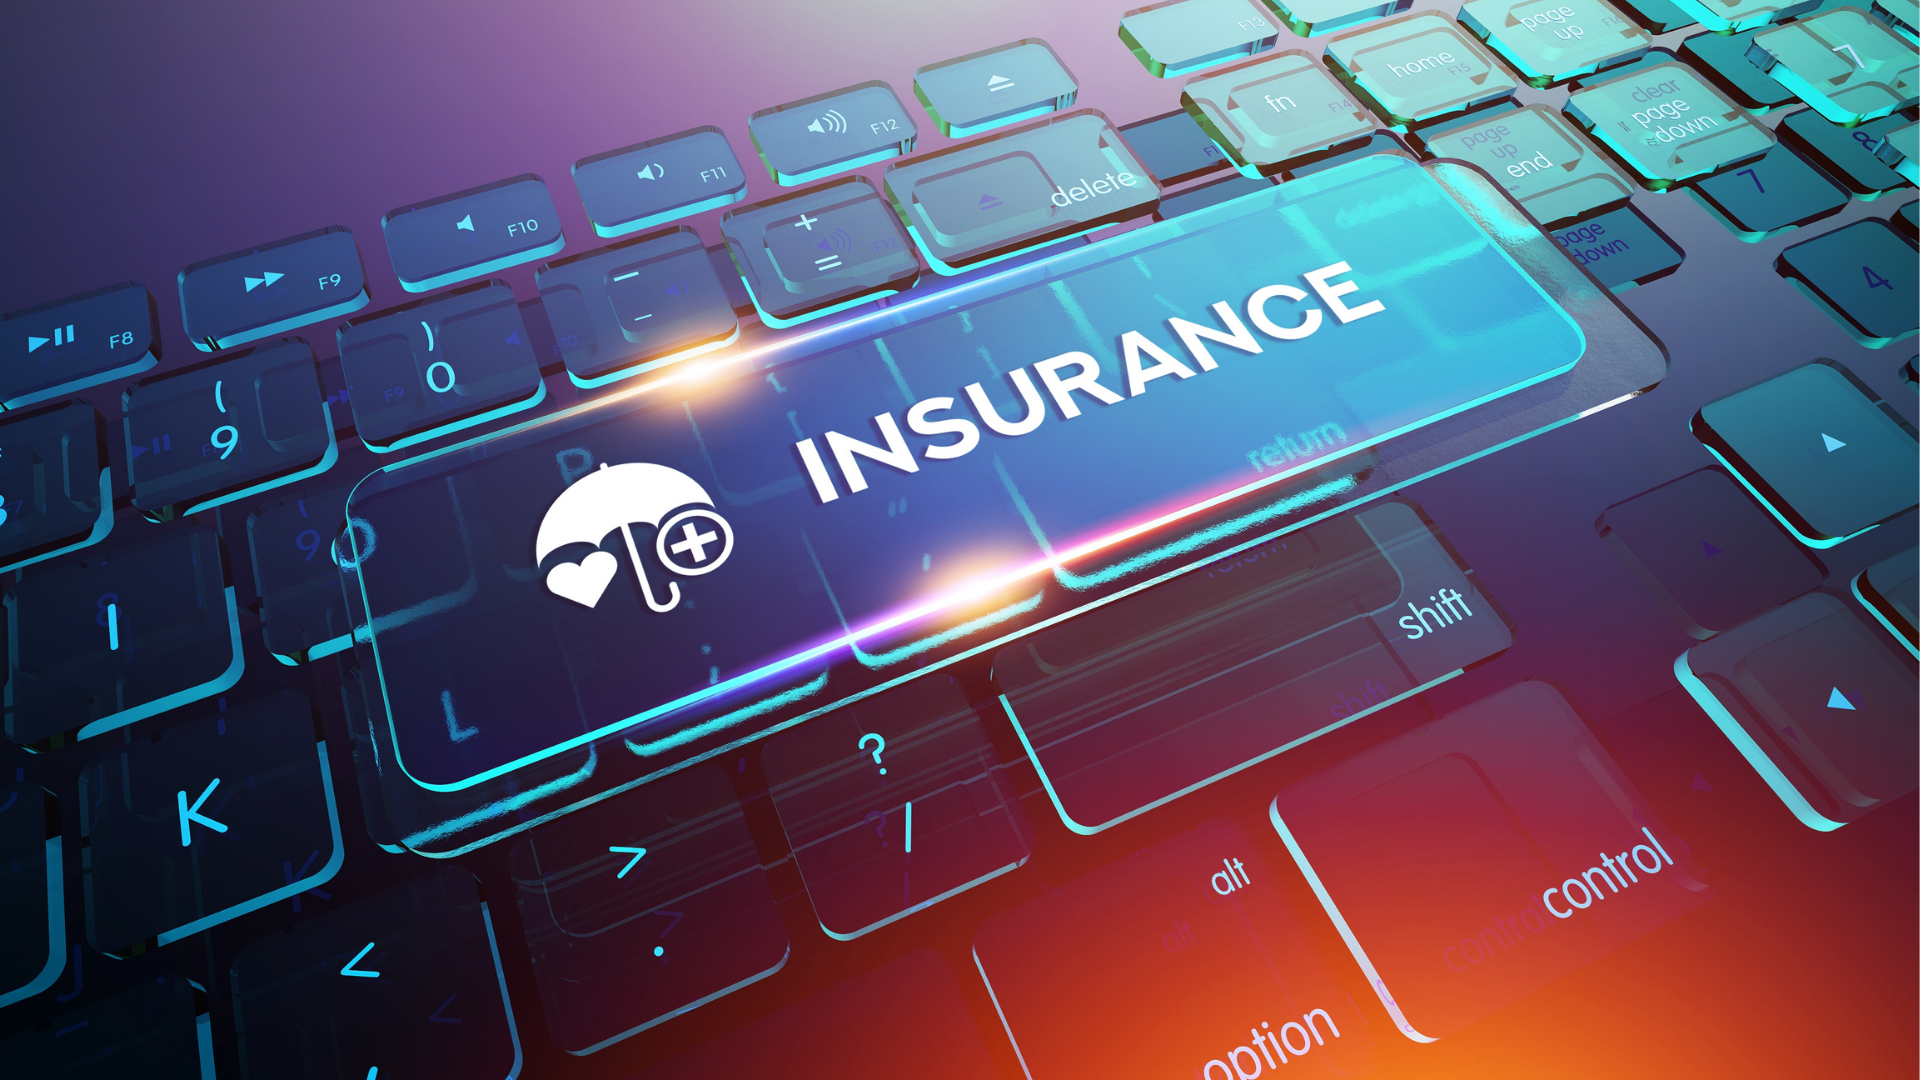 Mactavish Reports Businesses Are Facing Huge Increase In Their Insurance Premiums in 2021 